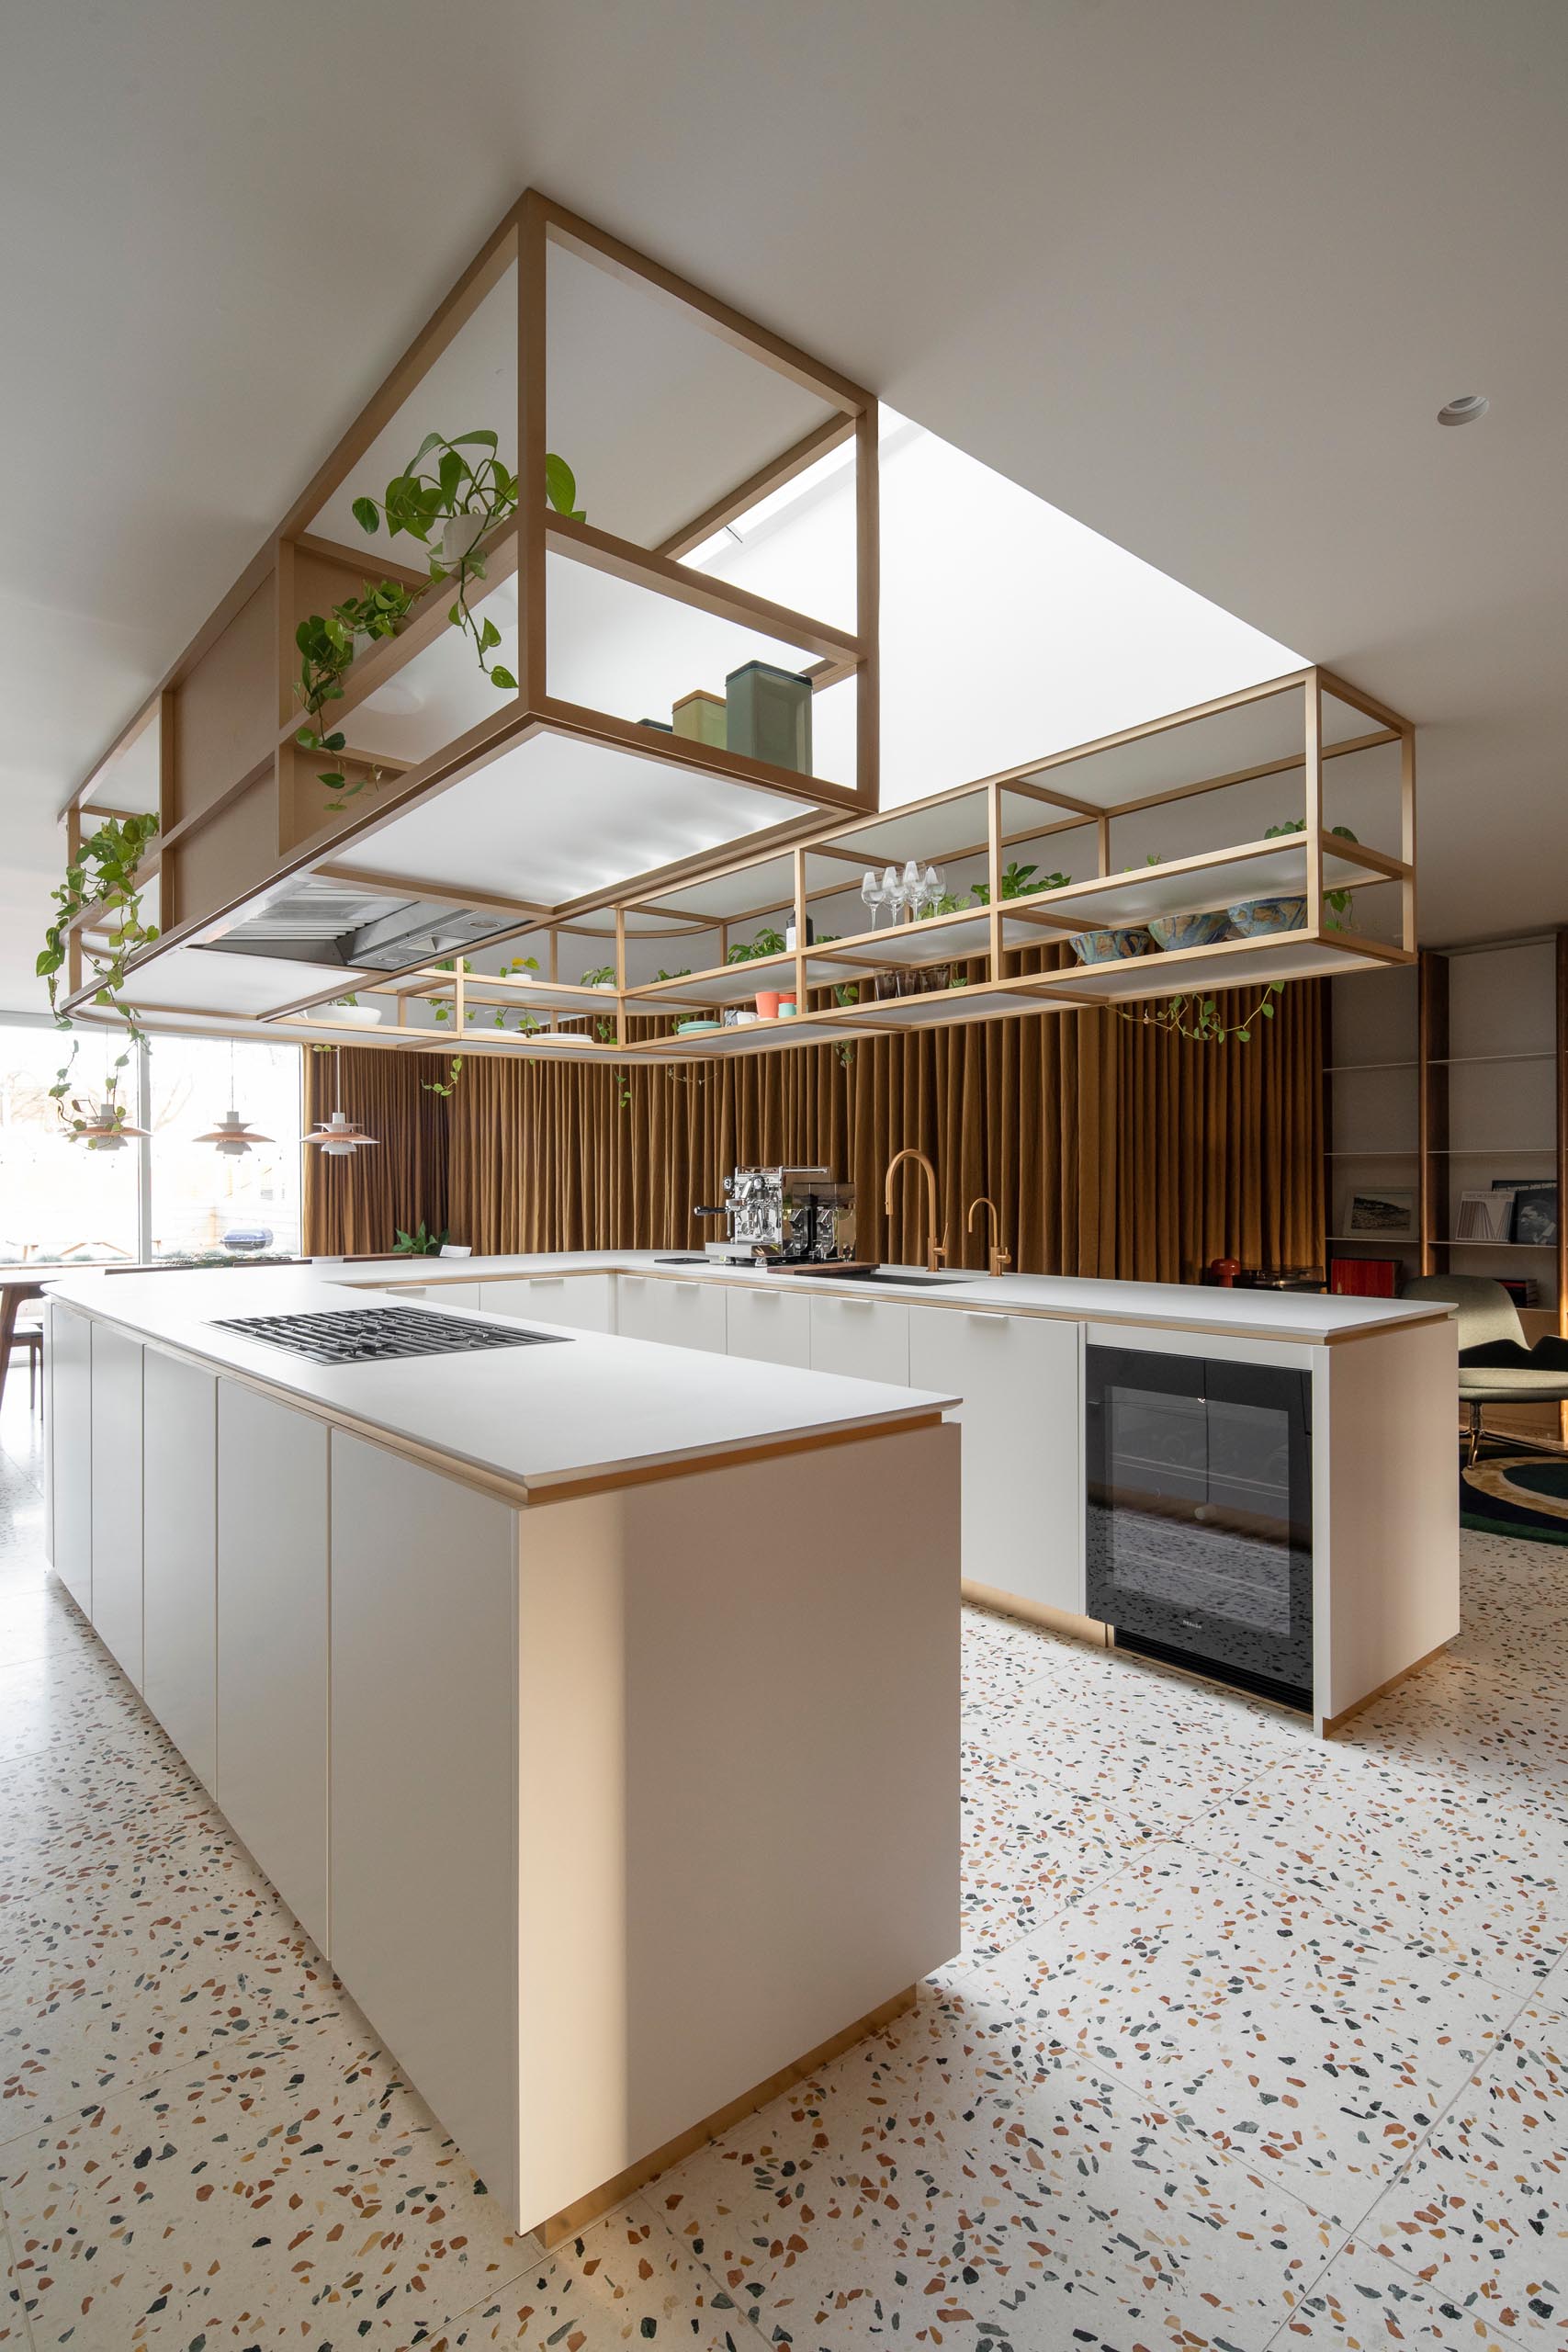 This modern U-shaped kitchen has a terrazzo tile floor, and an elegantly curved countertop with matching upper shelves that are open for easy access.  